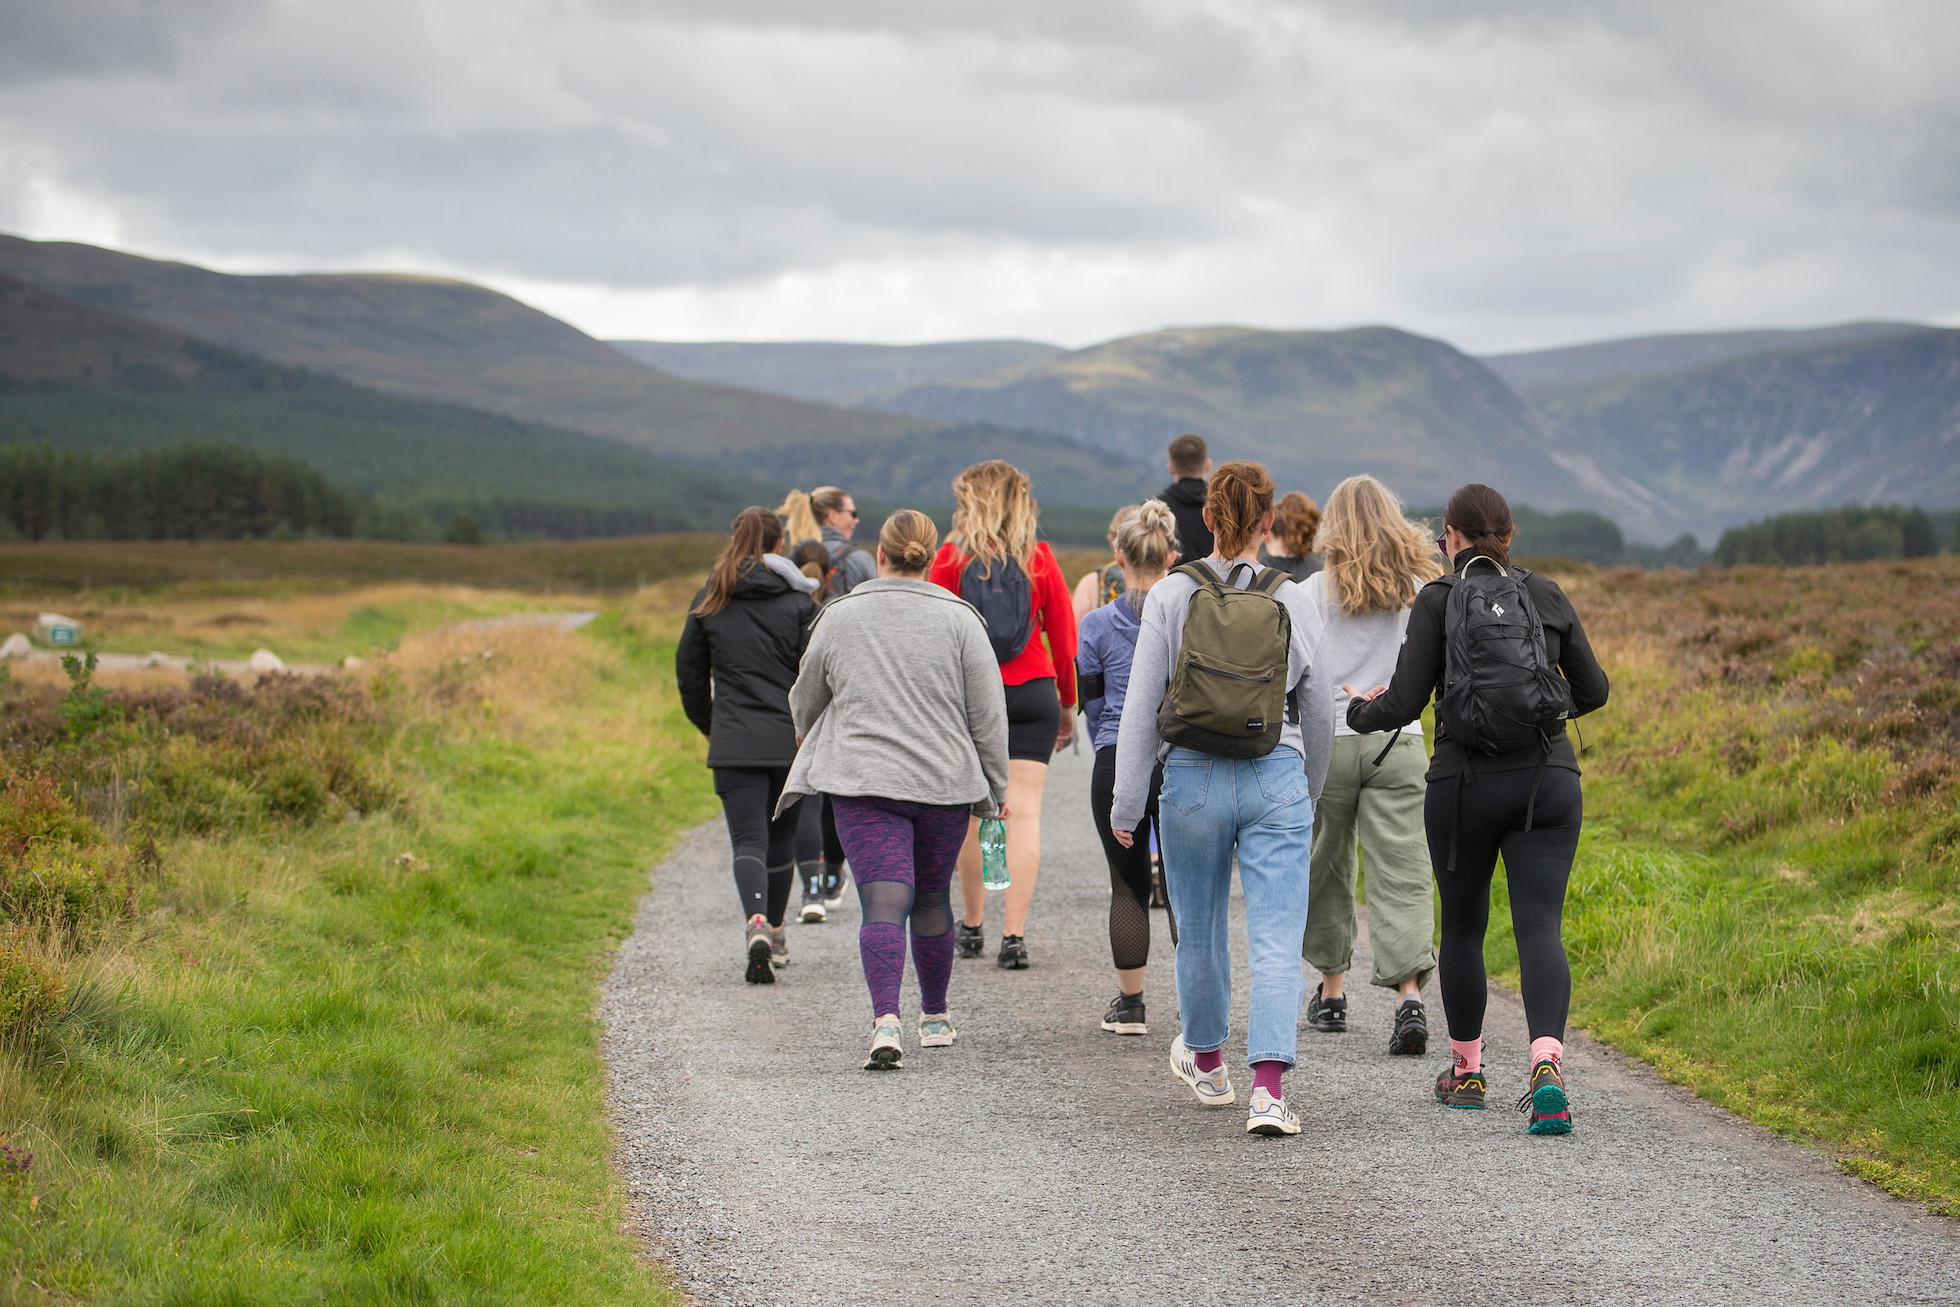 Group of young women walking in the Cairngorms National Park, Scotland.